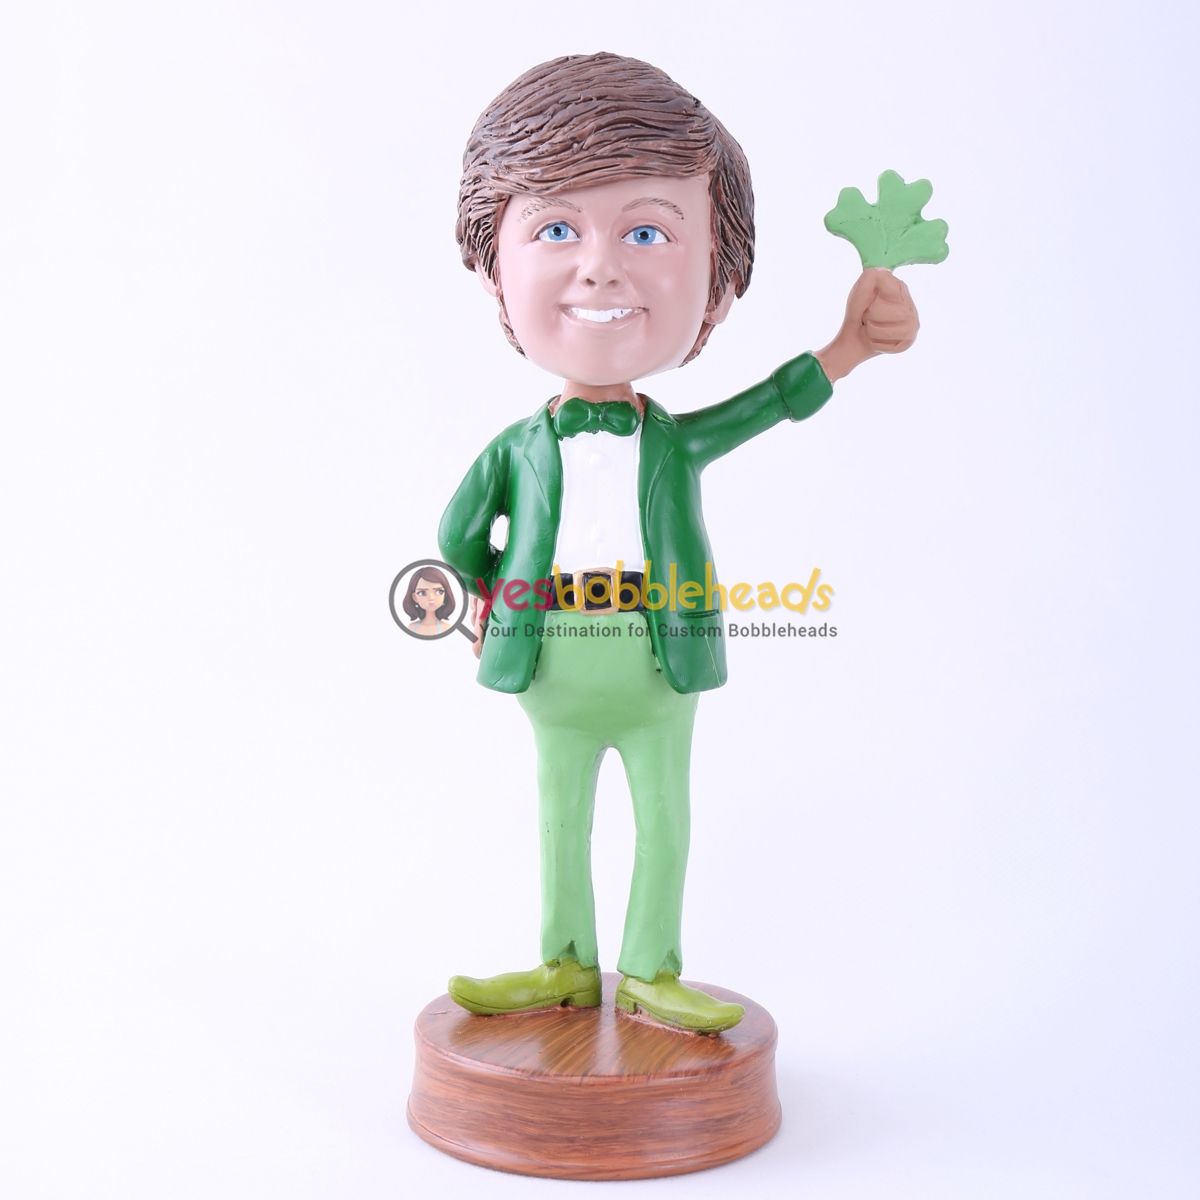 Picture of Custom Bobblehead Doll: Man Holding Leaves